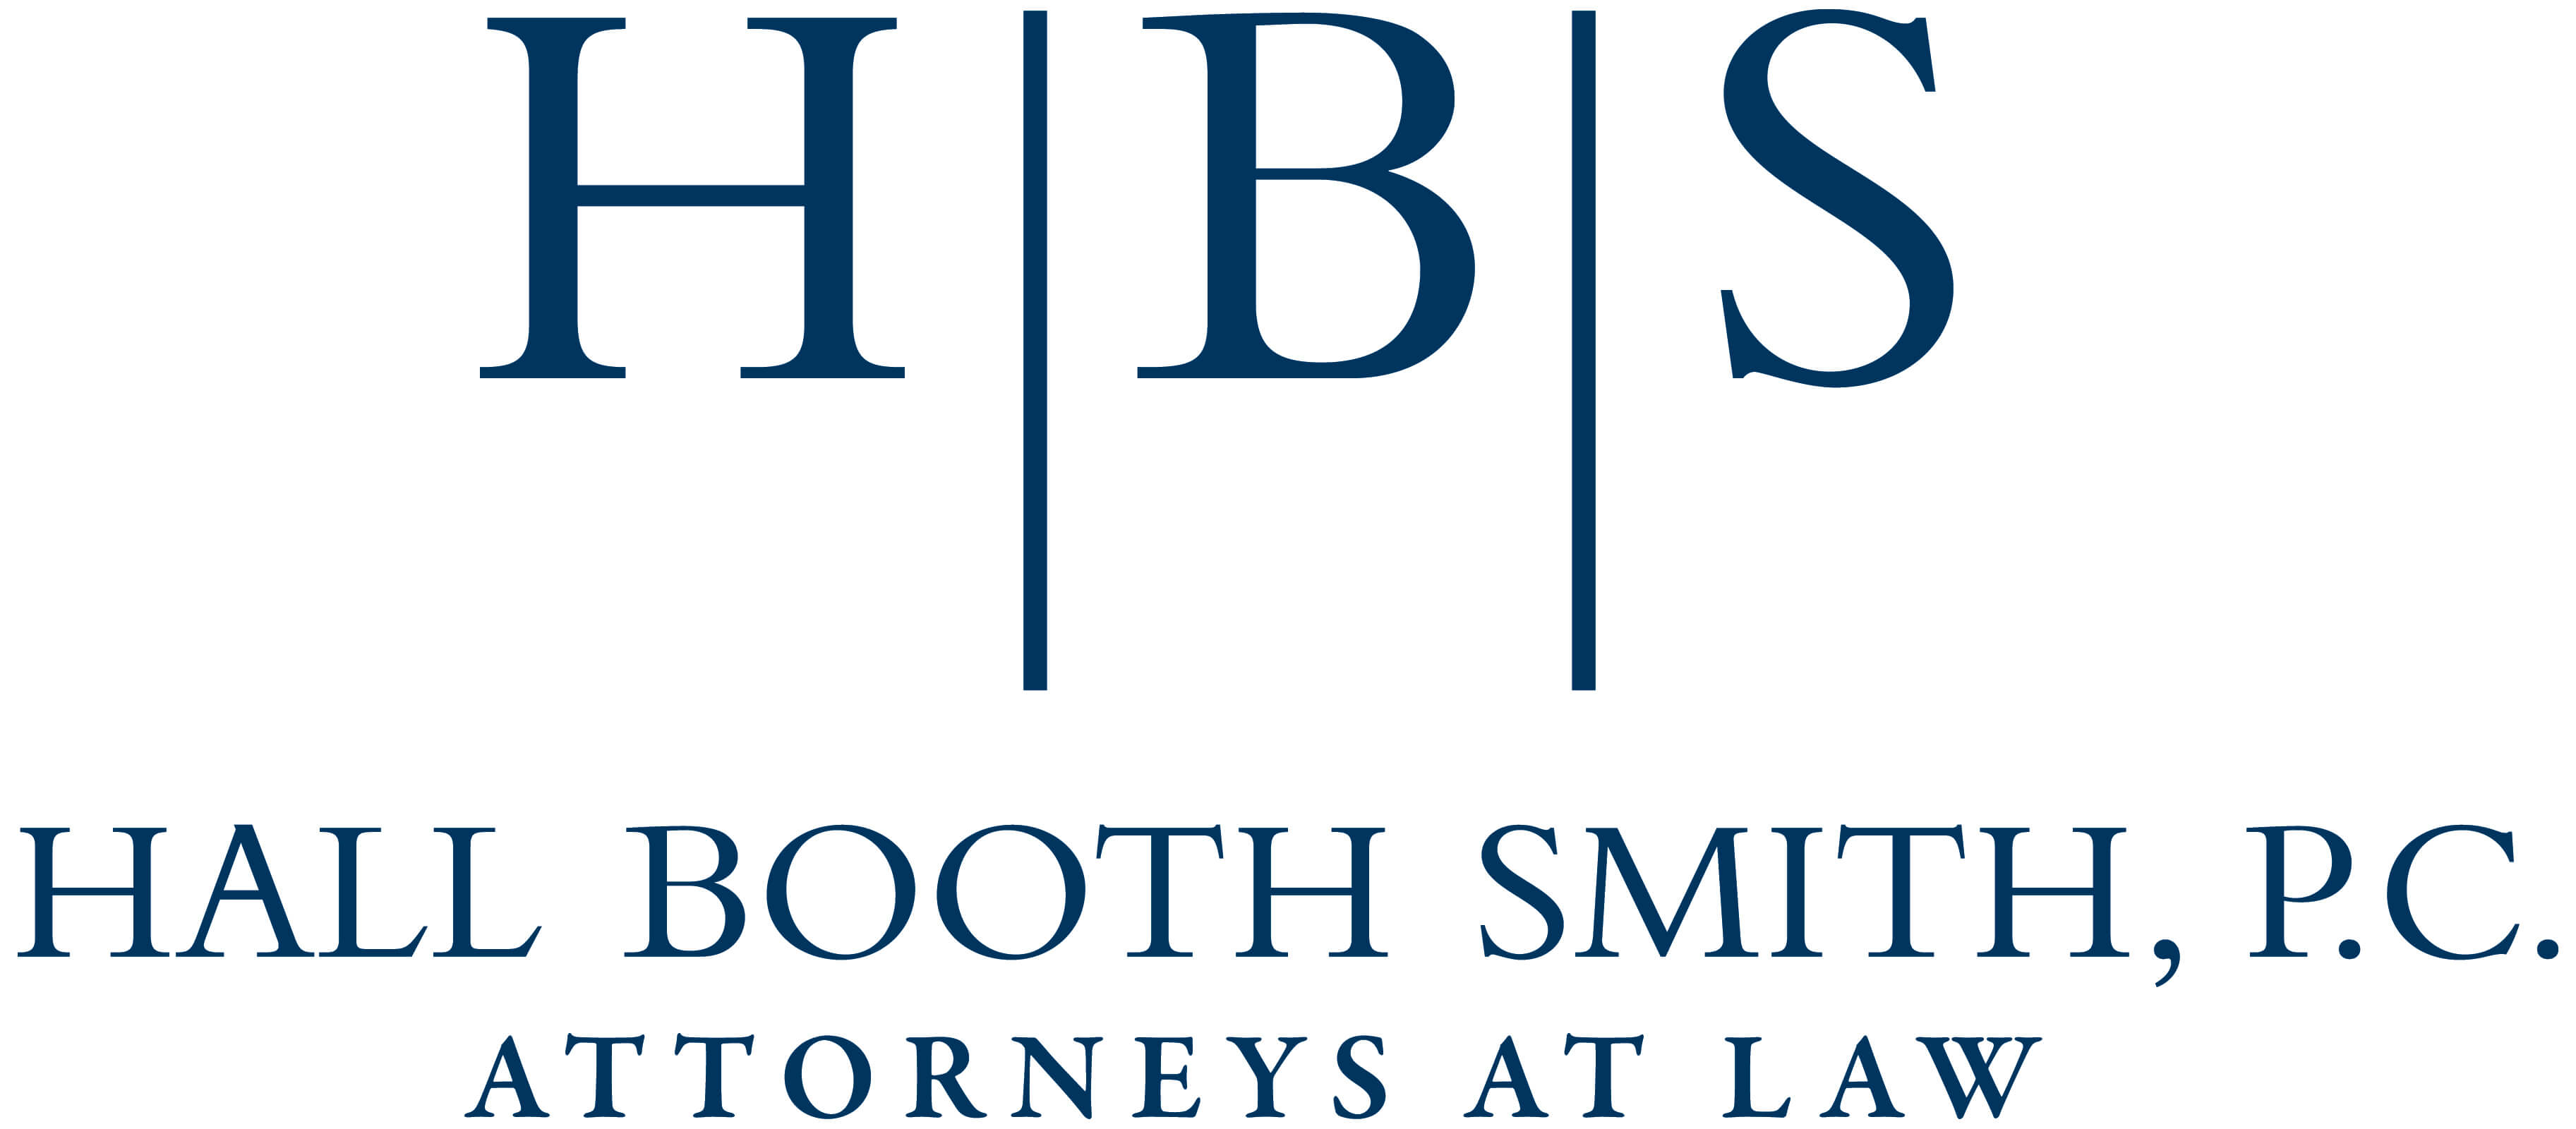 H|B|S Hall Booth Smith, P.C. Attorneys at Law